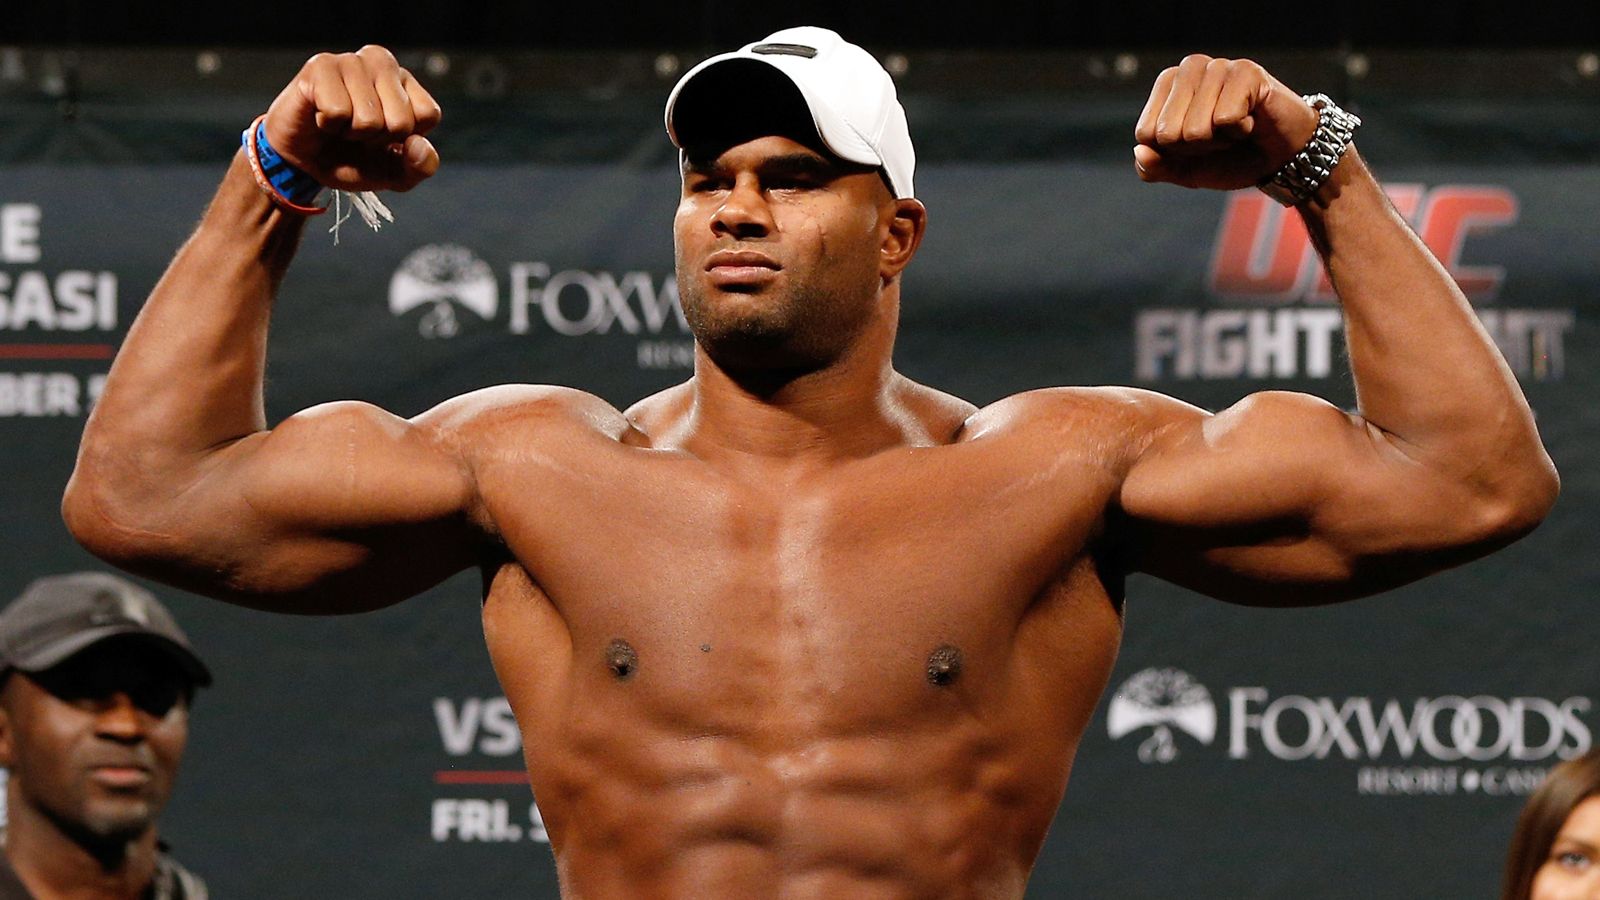 Past the perpetual drama, Alistair Overeem remains one of the best in the w...